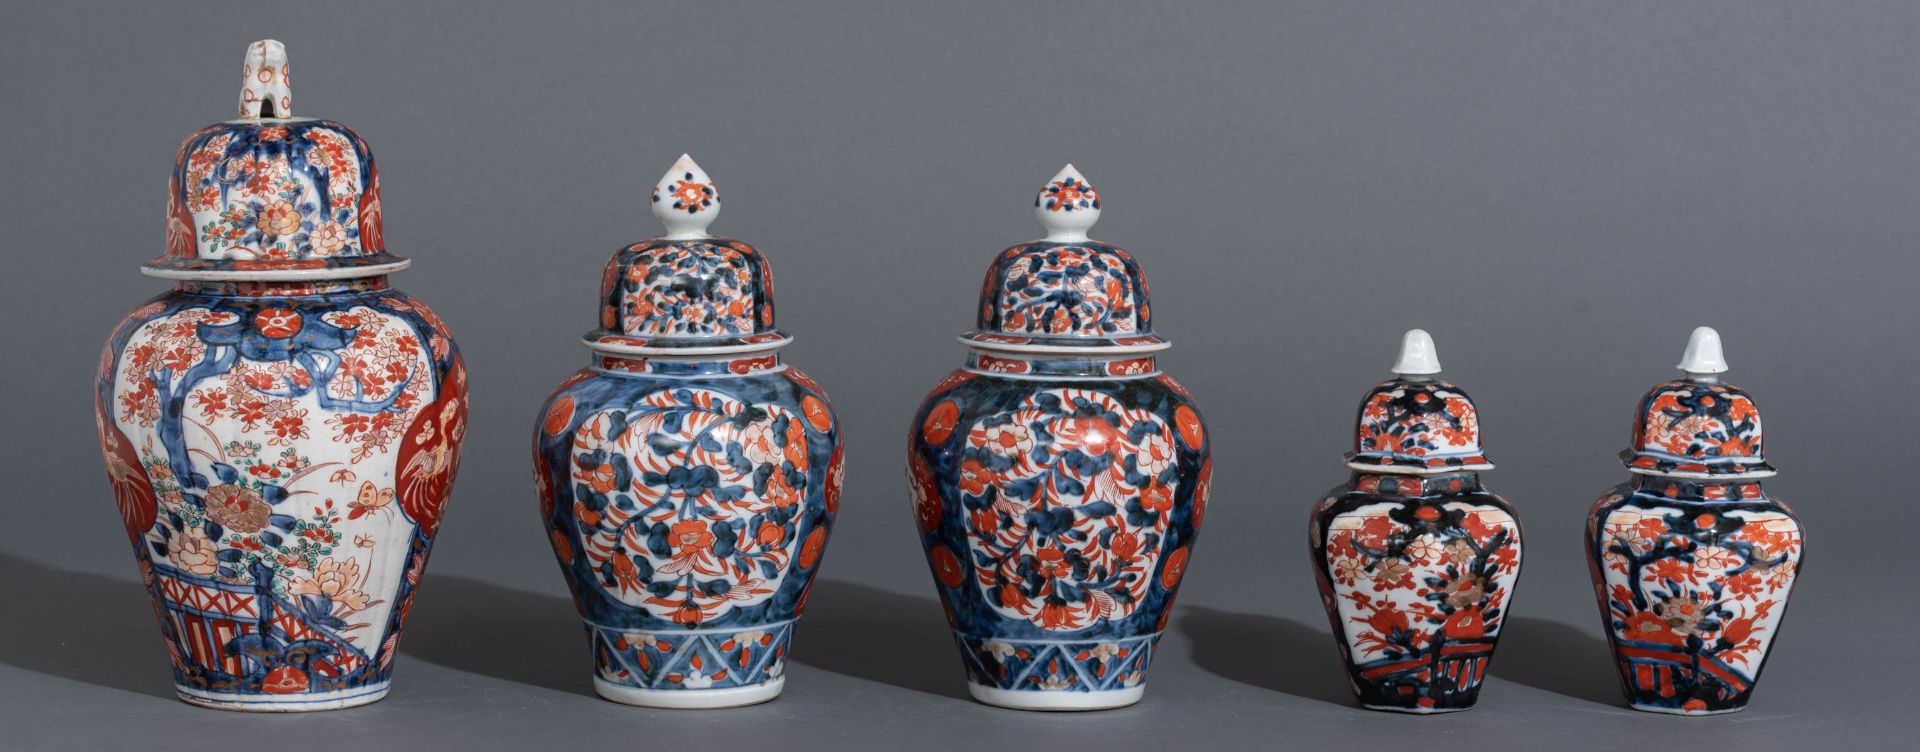 A collection of five Japanese Imari vases and covers - Image 2 of 9